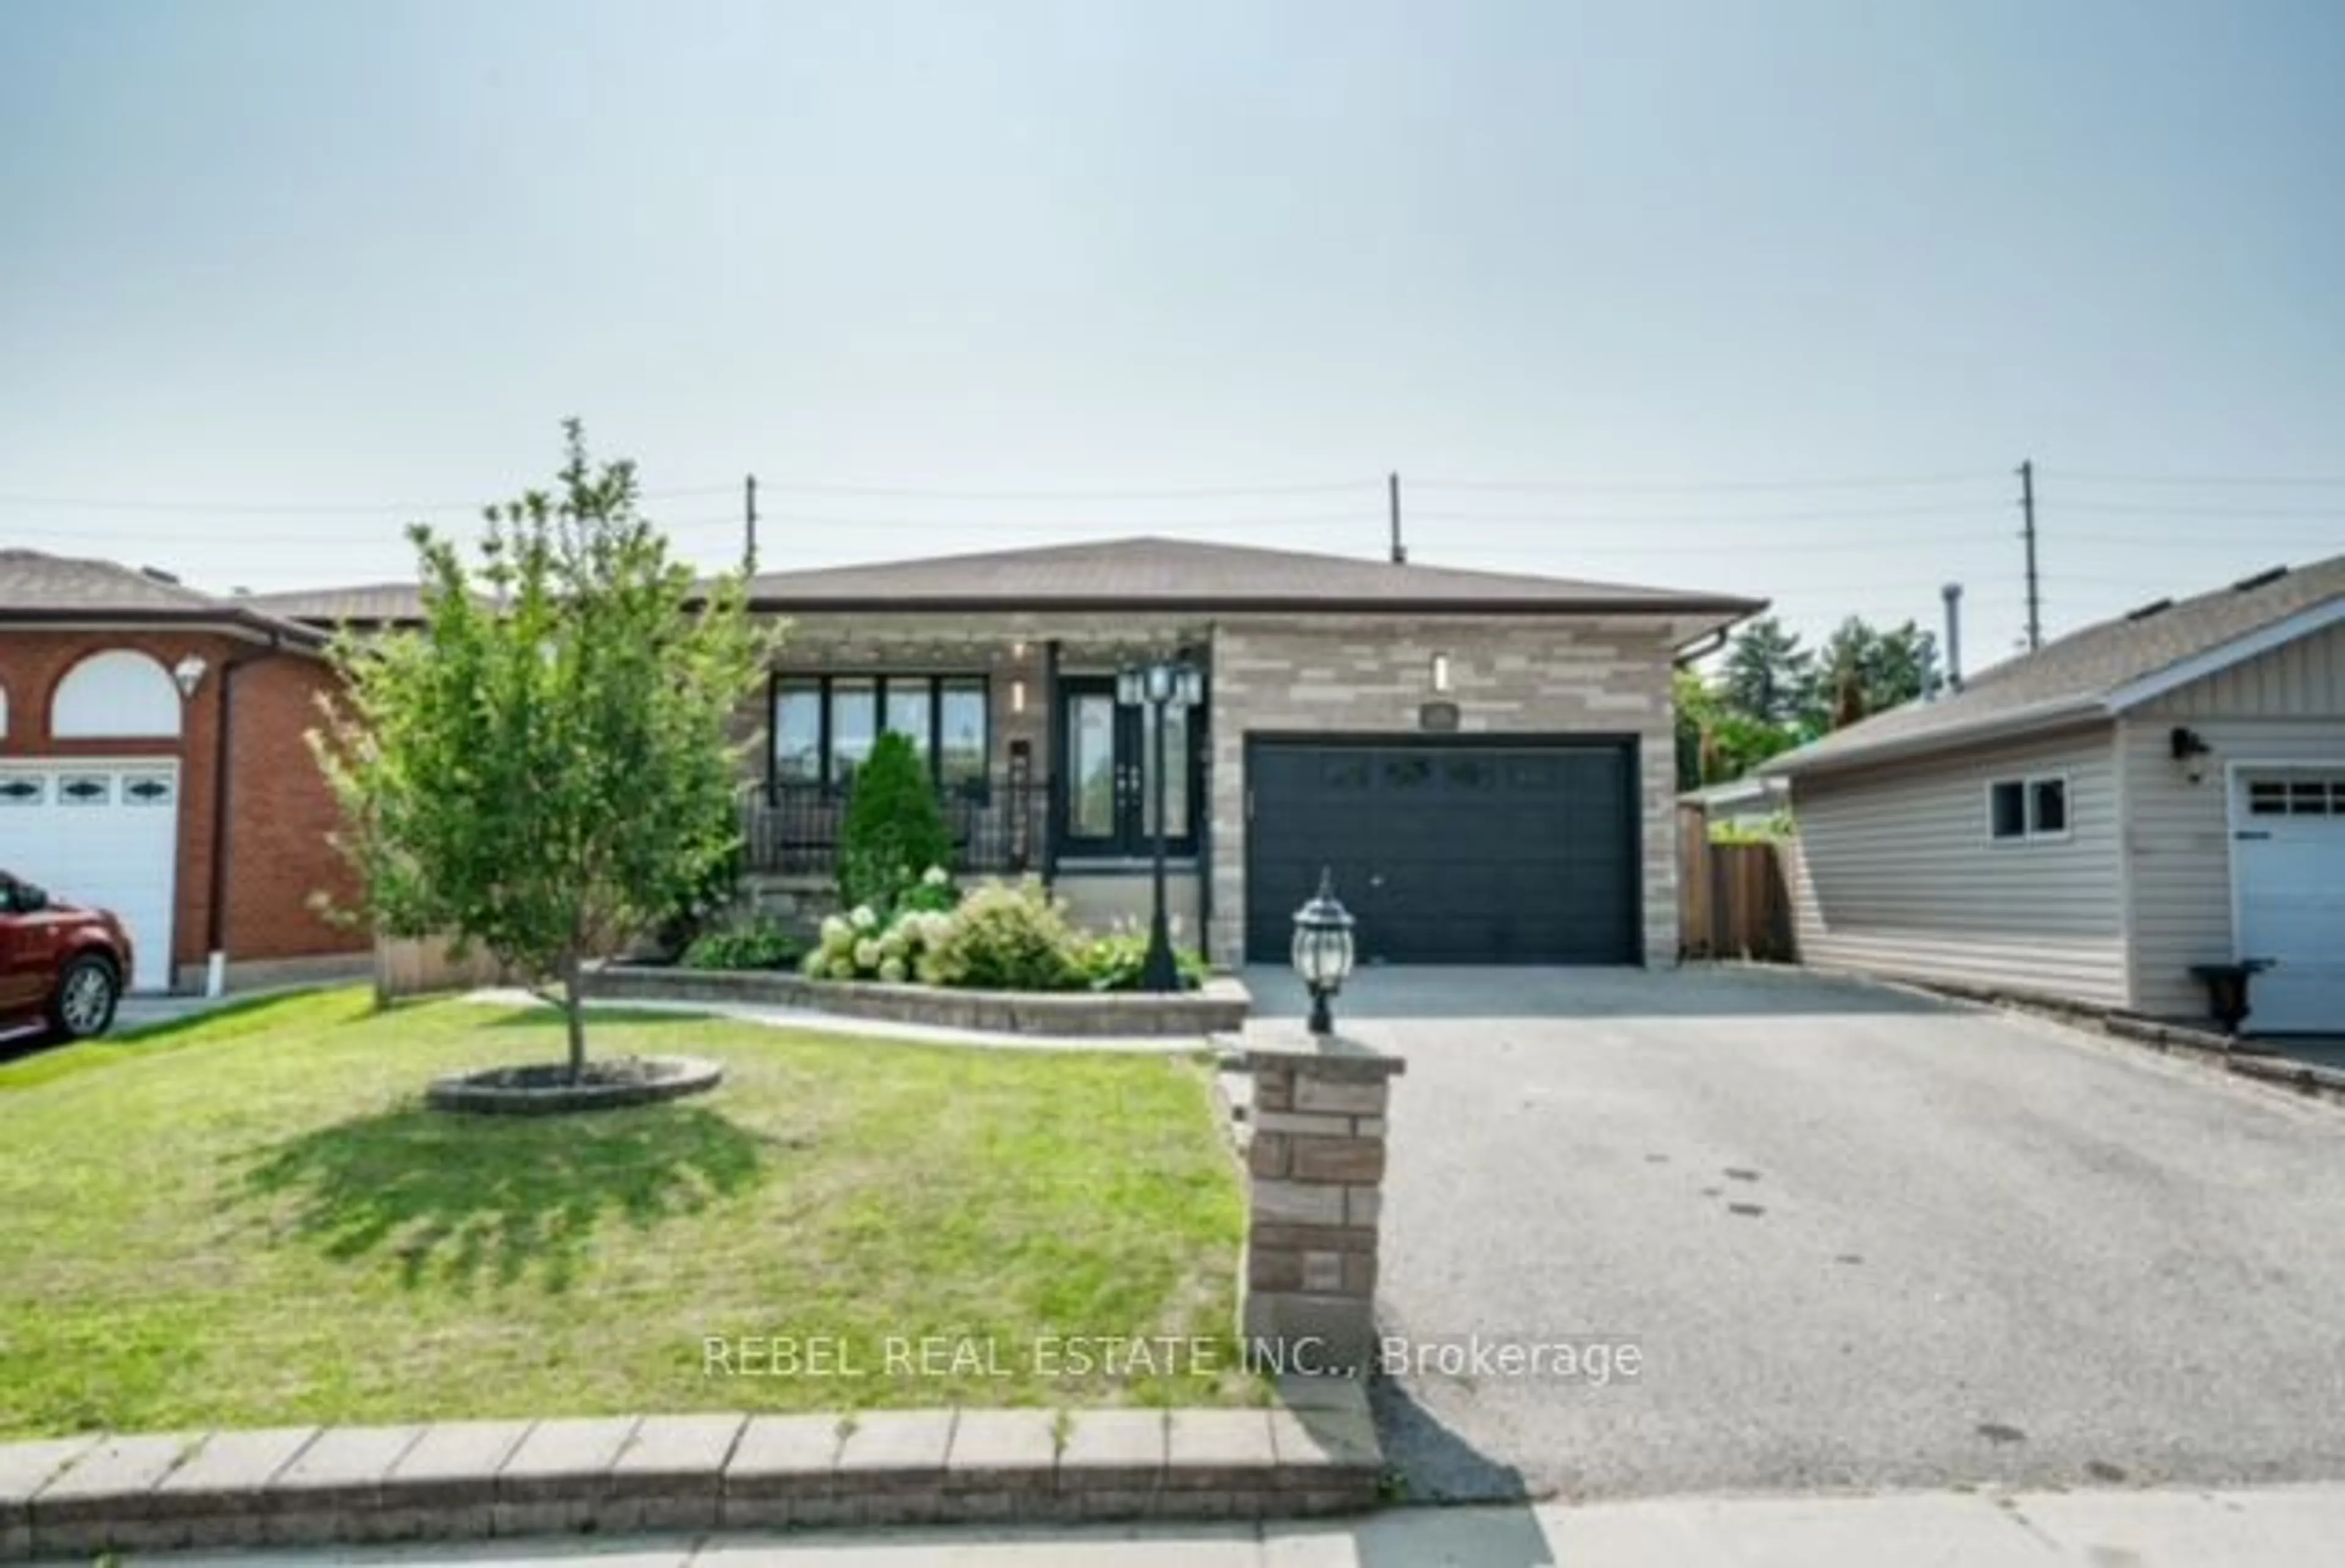 Home with brick exterior material for 348 Preston Dr, Oshawa Ontario L1J 6Y7